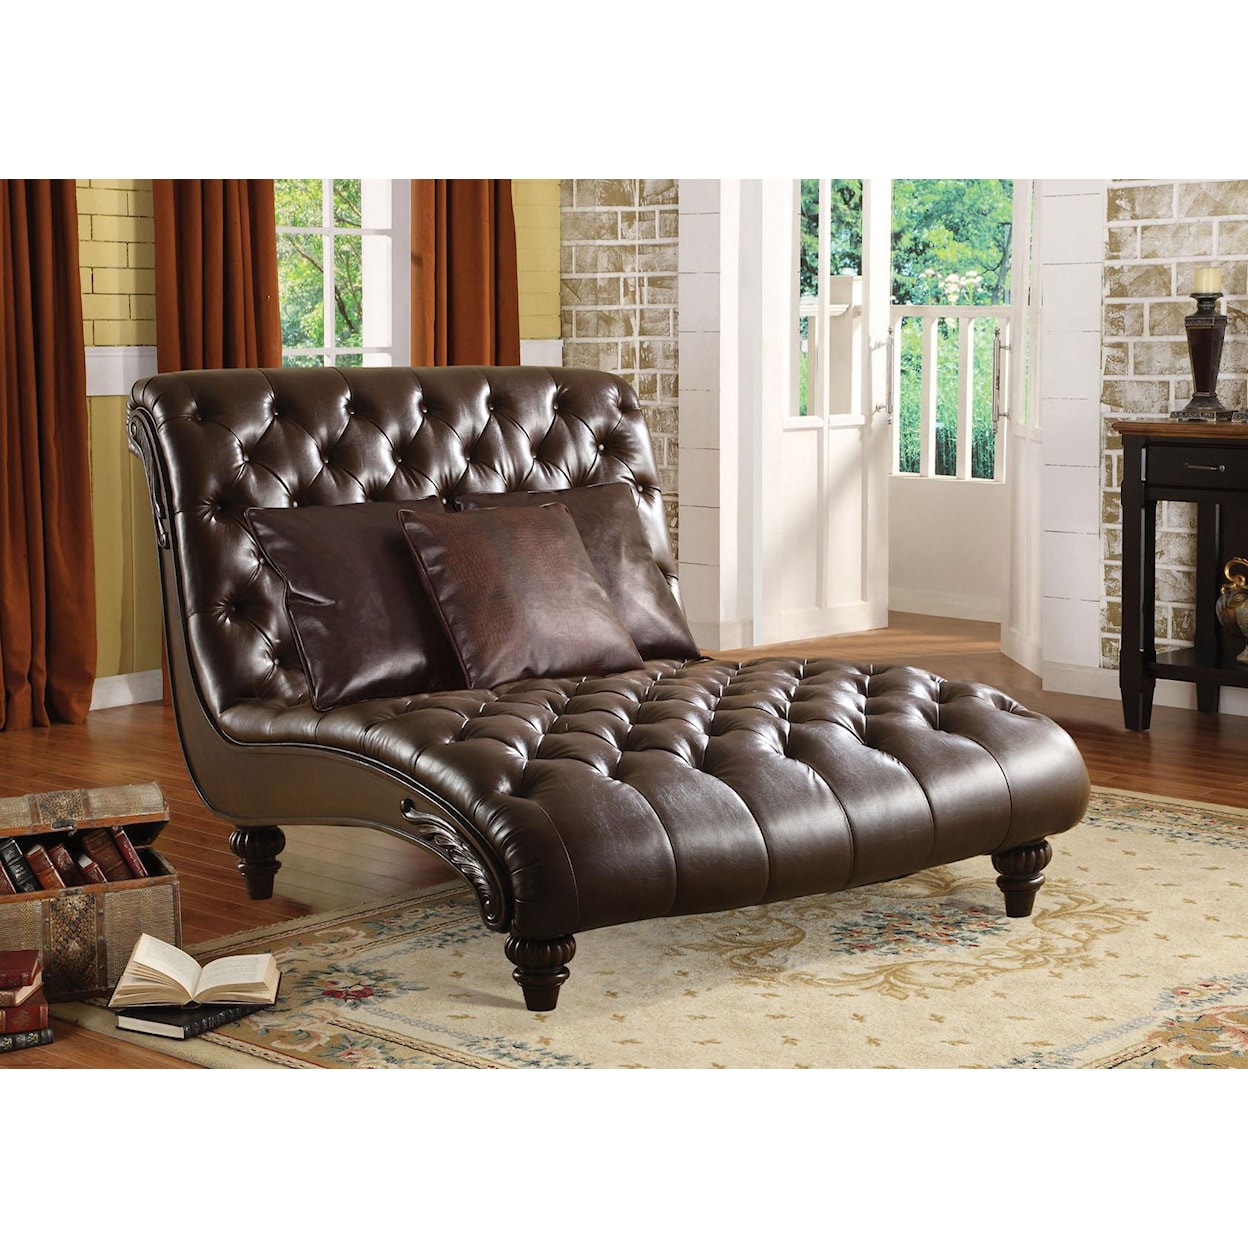 Acme Furniture Anondale Traditional Chaise Lounge